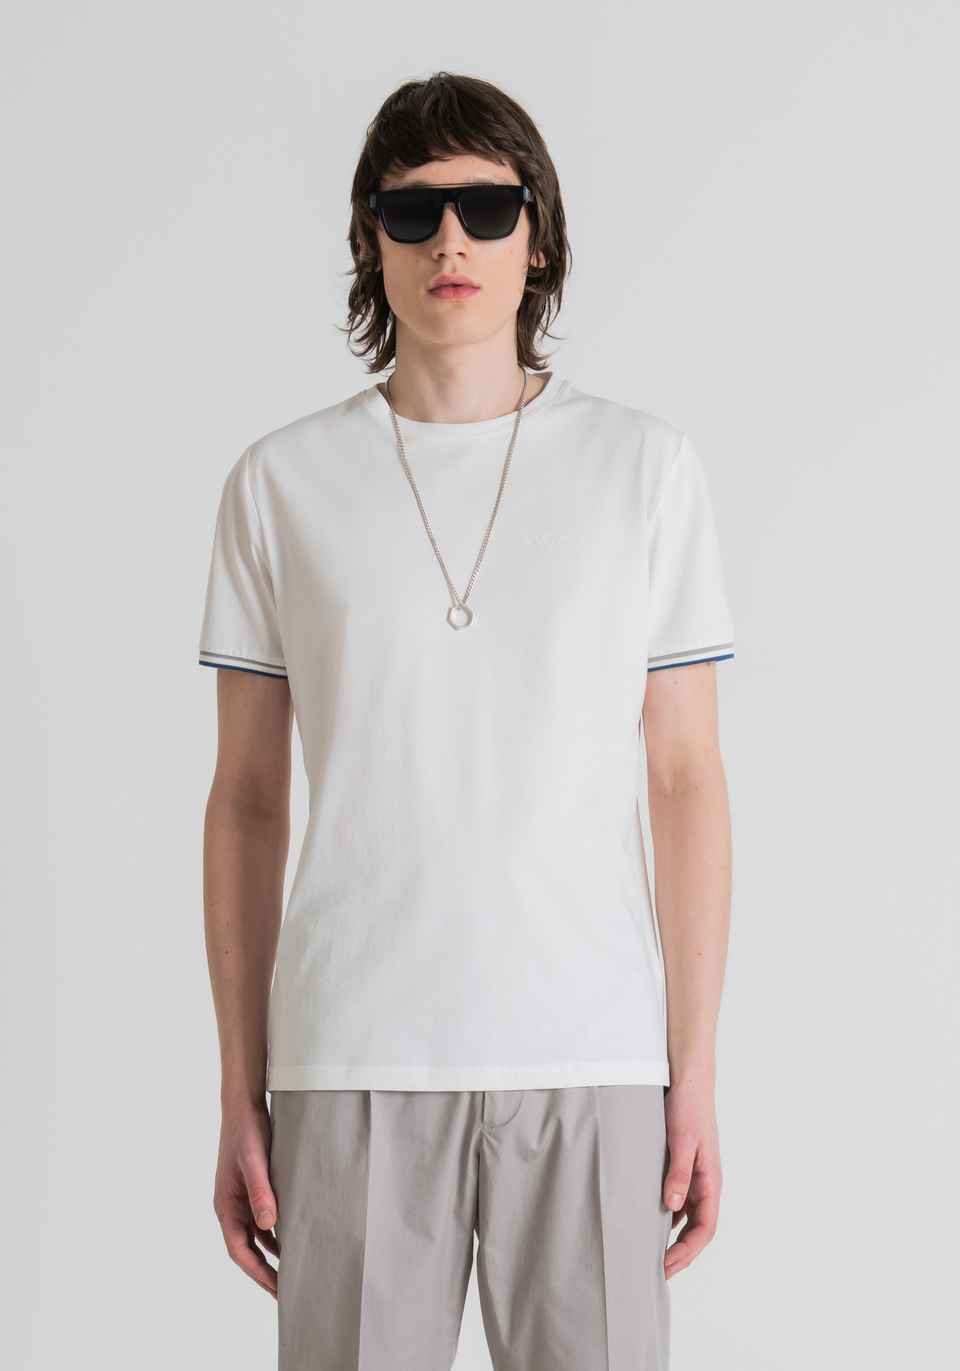 SLIM FIT T-SHIRT IN COTTON WITH RUBBERISED LOGO PRINT - Antony Morato Online Shop